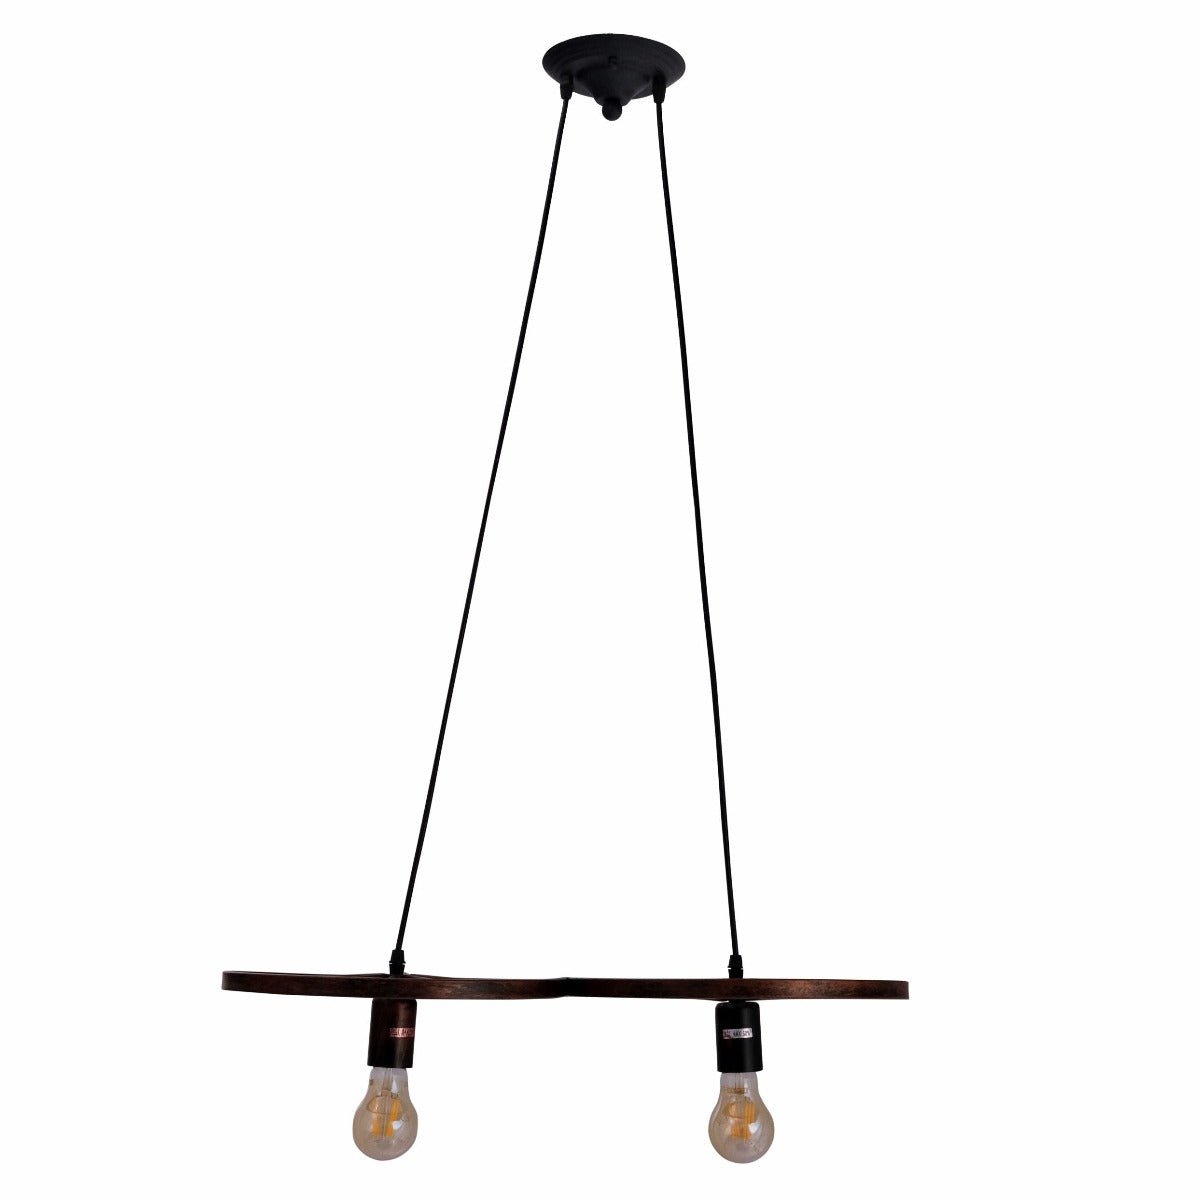 Main image of Vintage Industrial Wagon Wheel Pendant Light with 2xE27 Fitting | TEKLED 158-17890